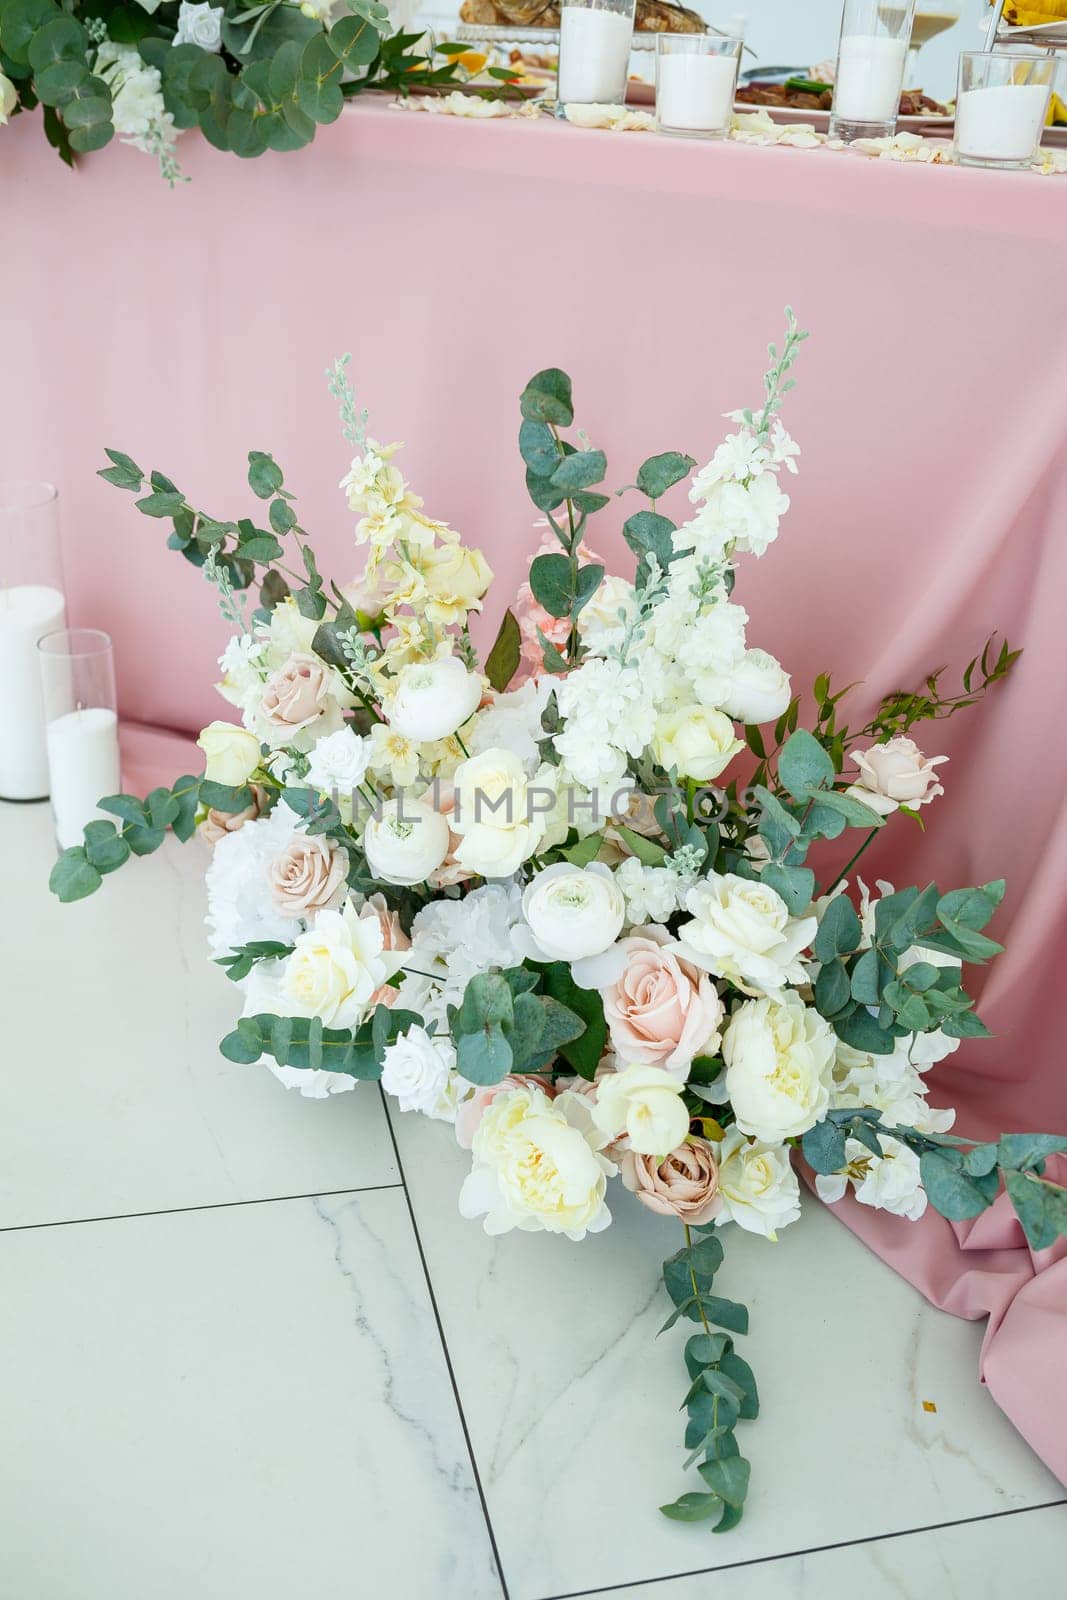 Wedding table decor for newlyweds decorations with fresh flowers by Dmitrytph